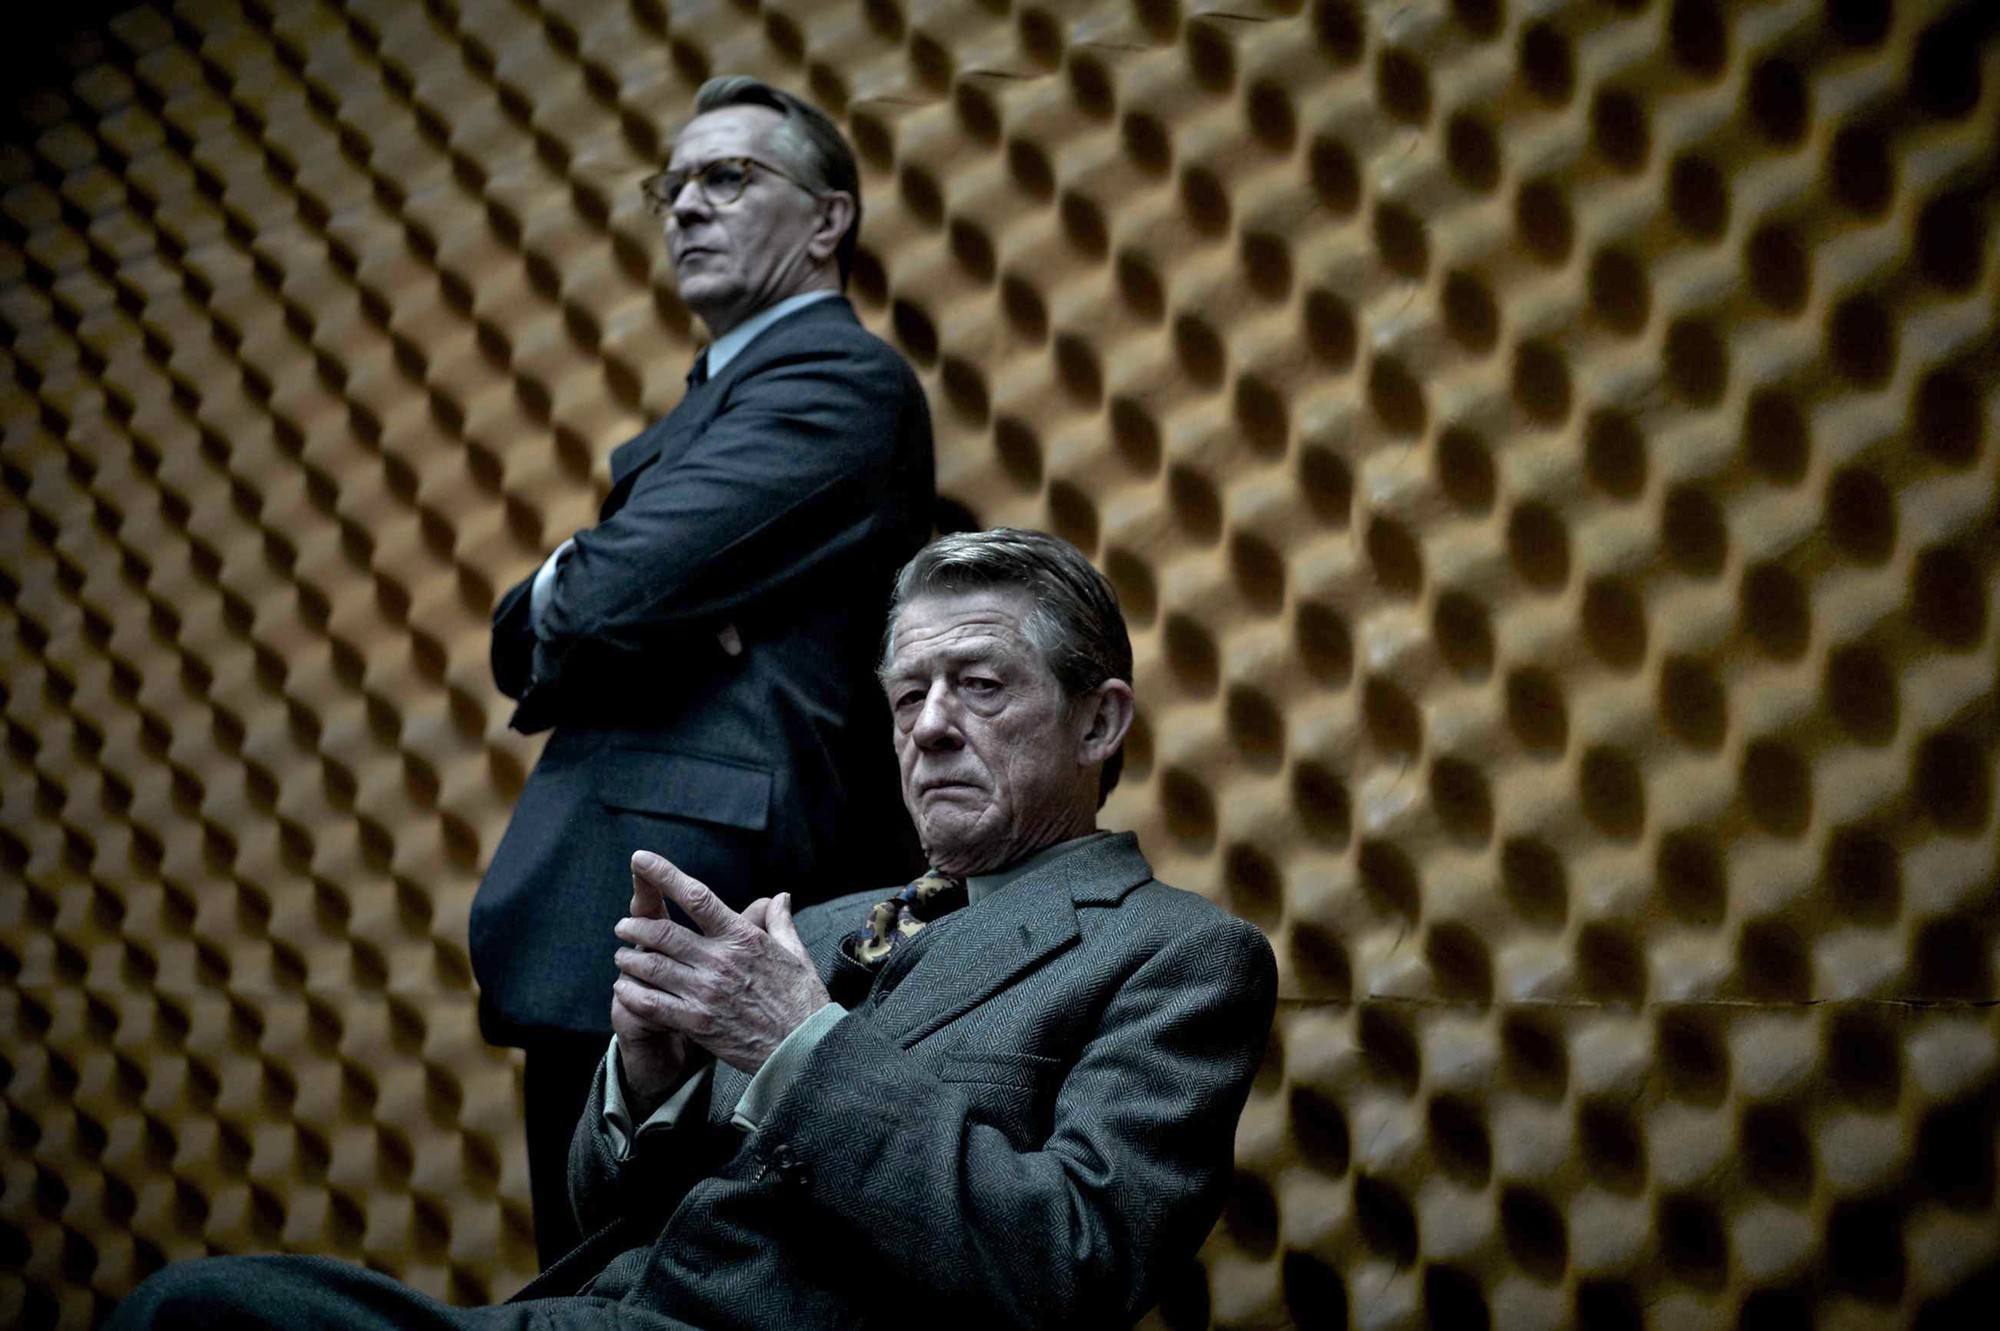 Gary Oldman stars as George Smiley and John Hurt stars as Control in Focus Features' Tinker, Tailor, Soldier, Spy (2011)